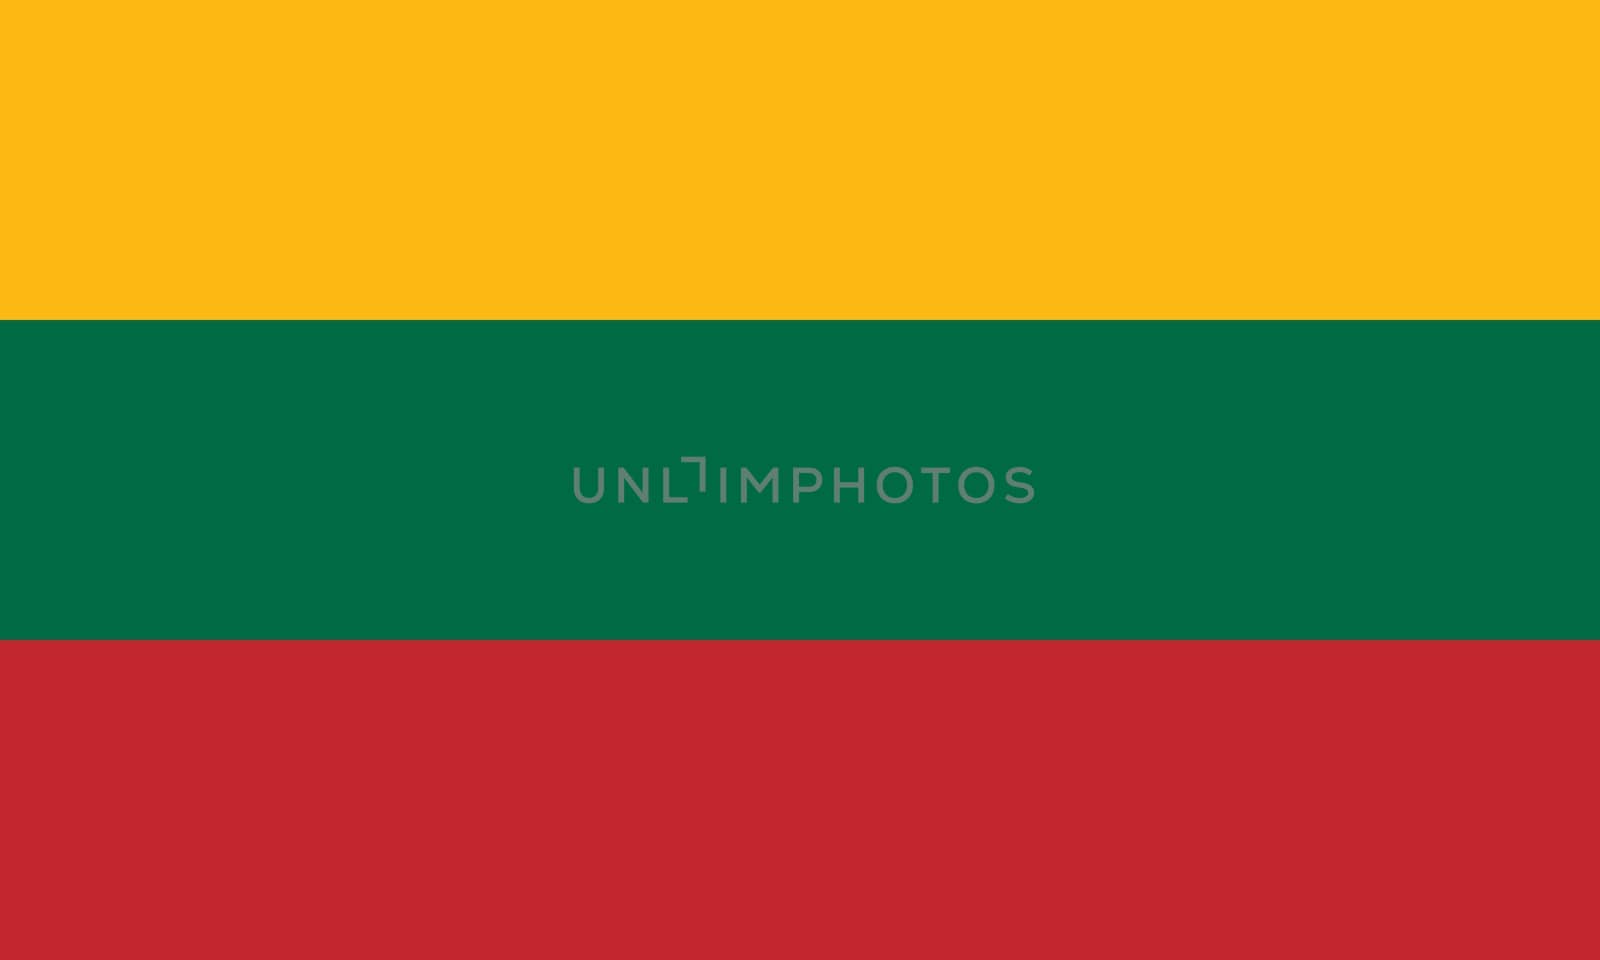 Lithuanian flag and language icon - isolated vector illustration